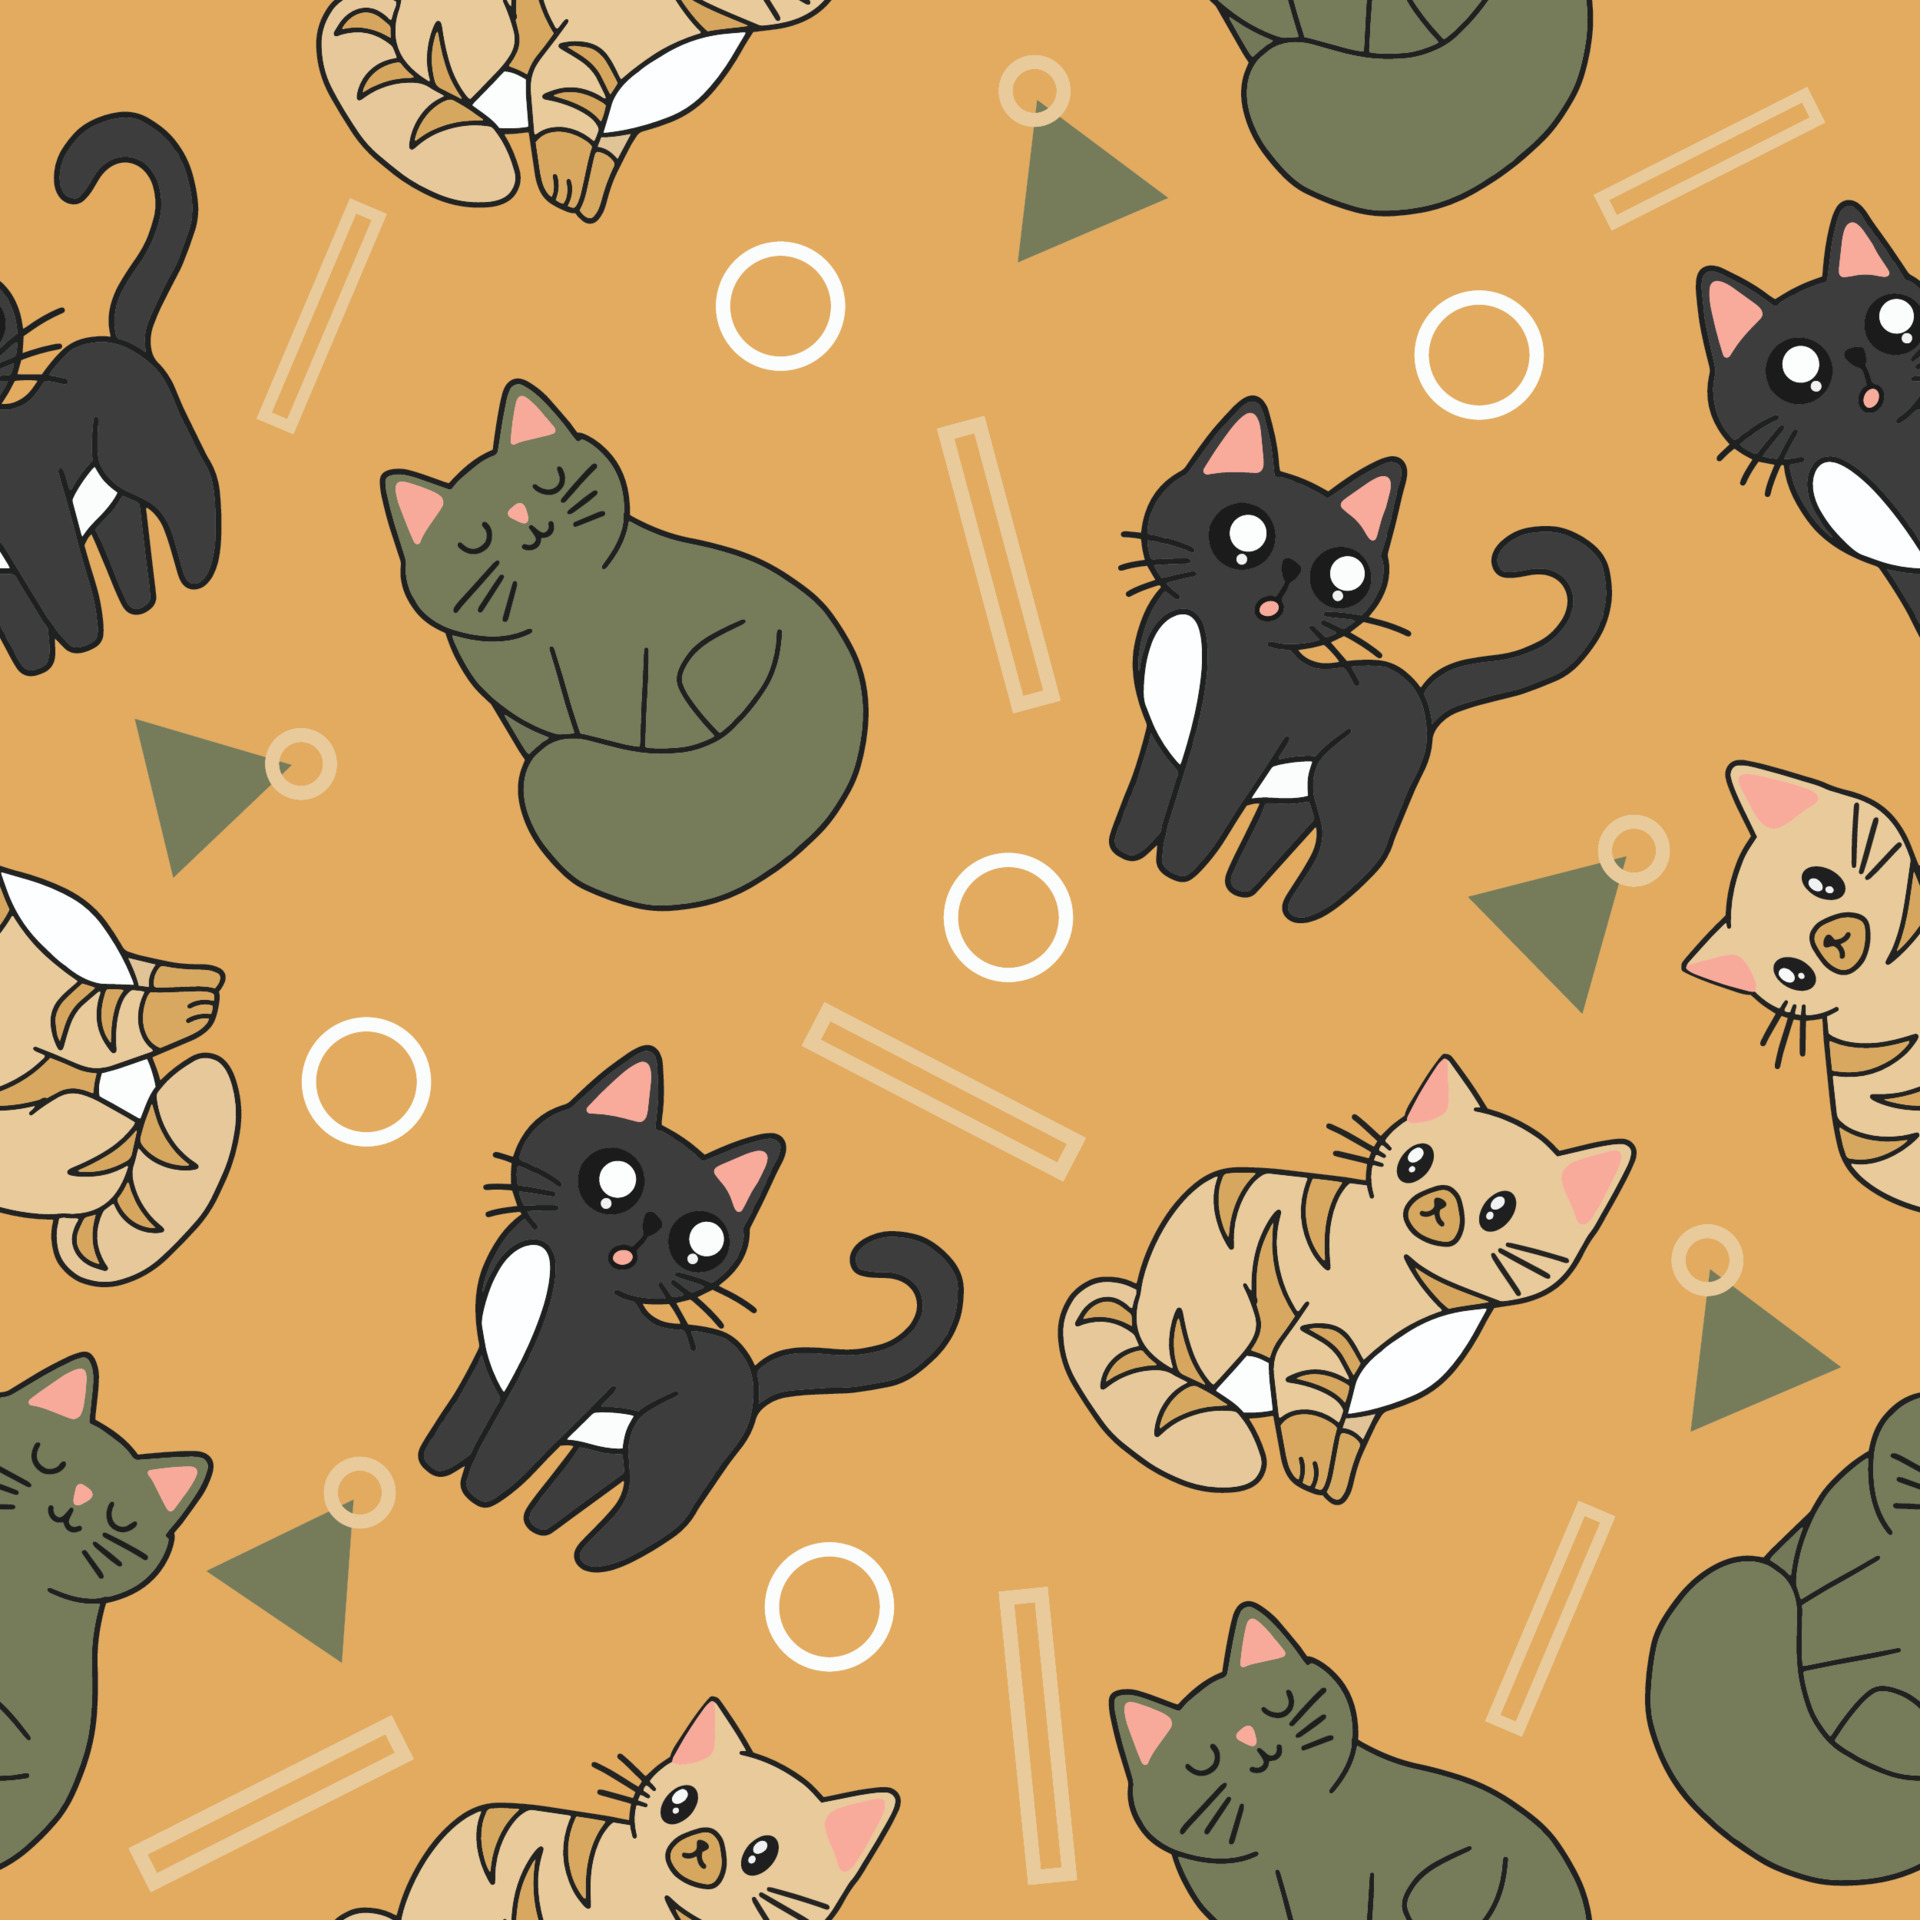 cute animal black and green cat seamless pattern wallpaper with design orange